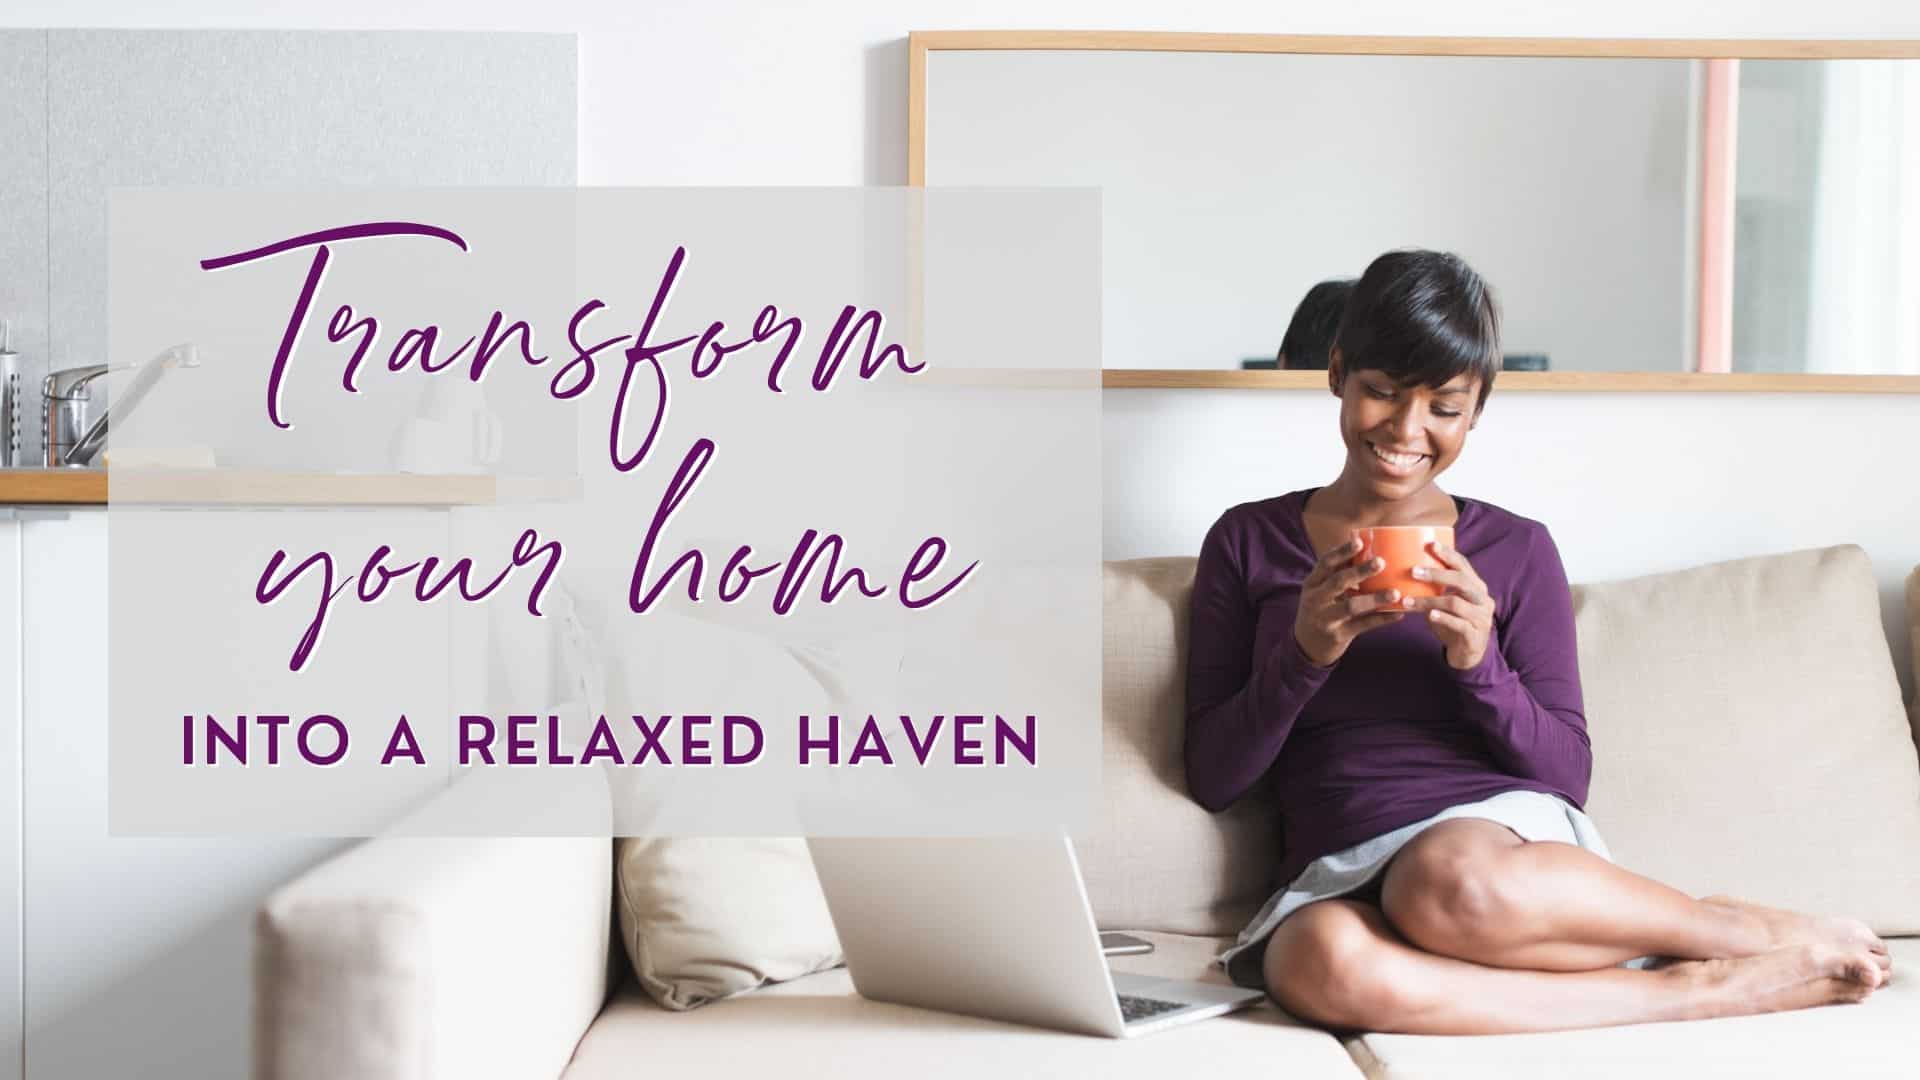 Transform Your Home Into a Relaxed Haven to Release Stress